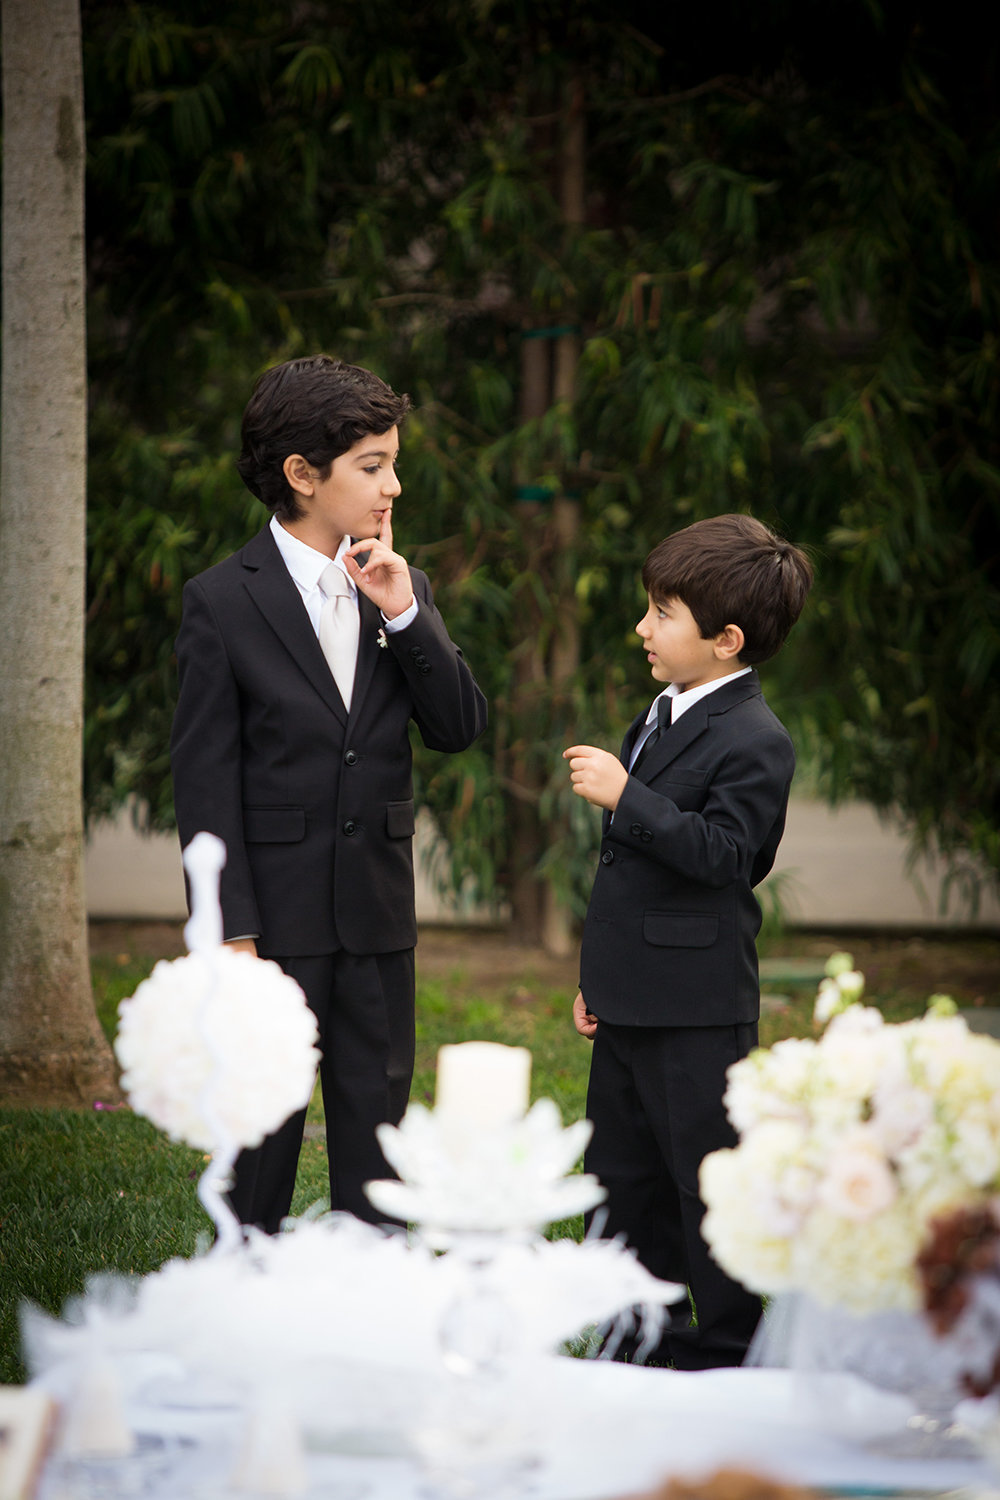 Ring bearers distracted during the wedding ceremony